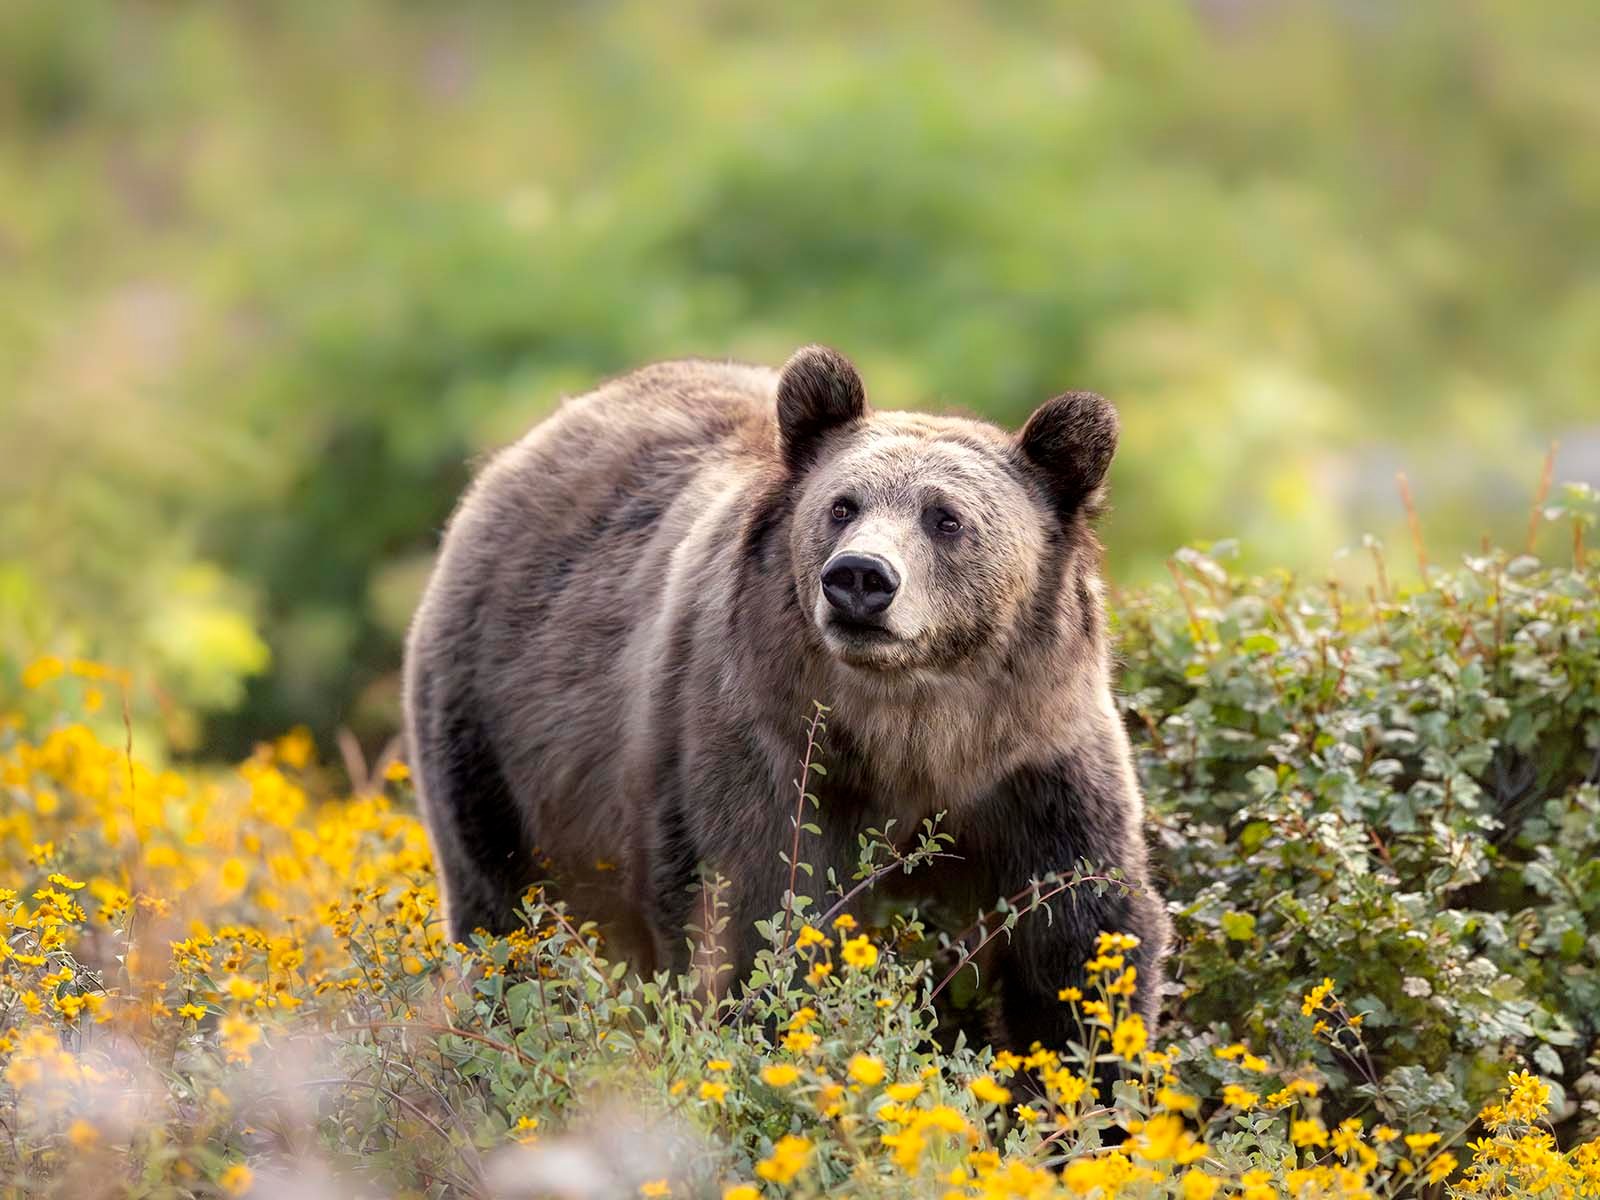 Grizzly Flowers. Photo by Julia Cook @julia.littlelightningnature